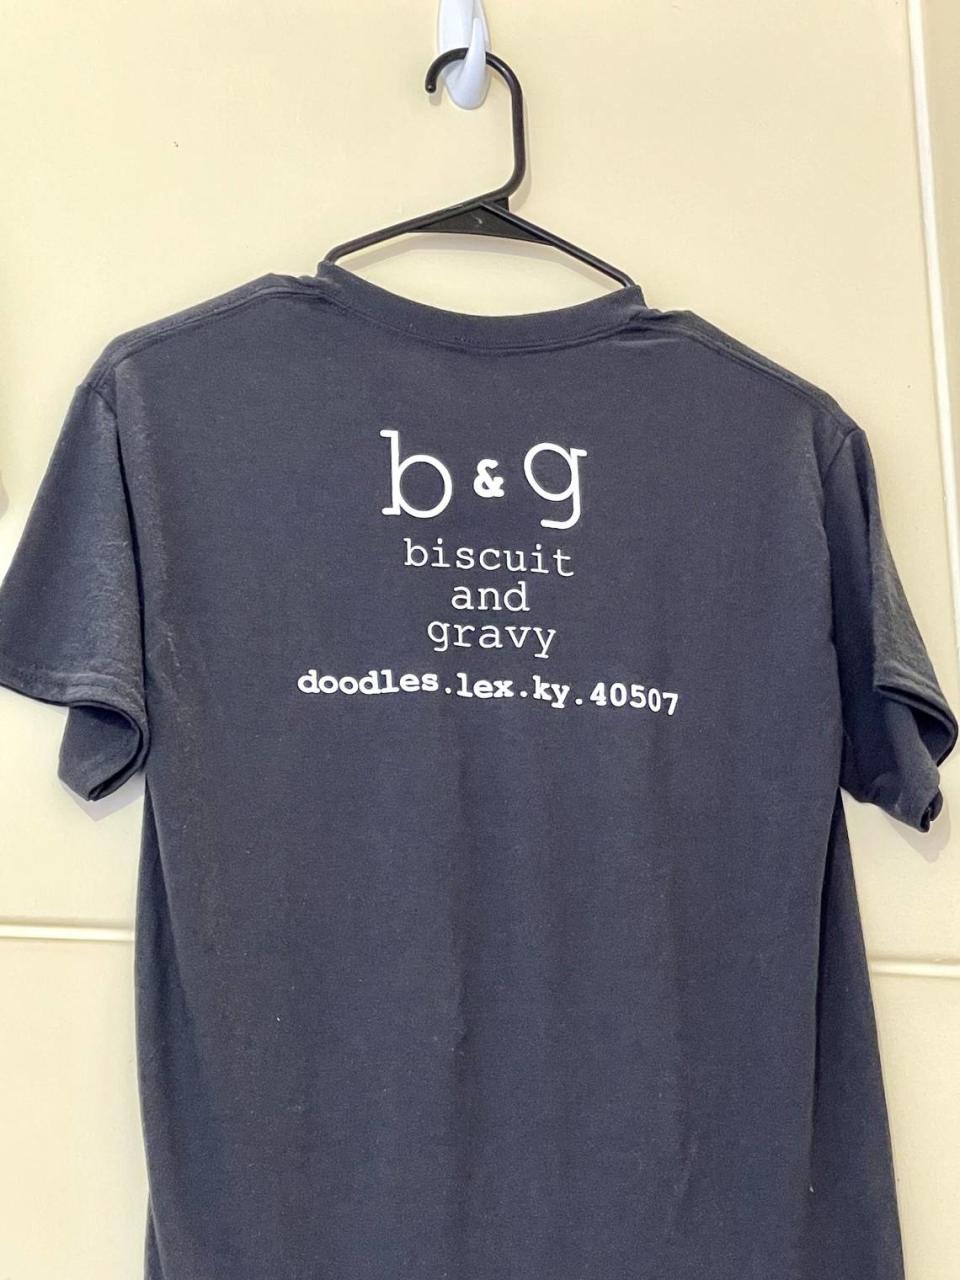 A T-shirt promoting biscuits and gravy from Doodle’s if you want to wear your love on your sleeve.